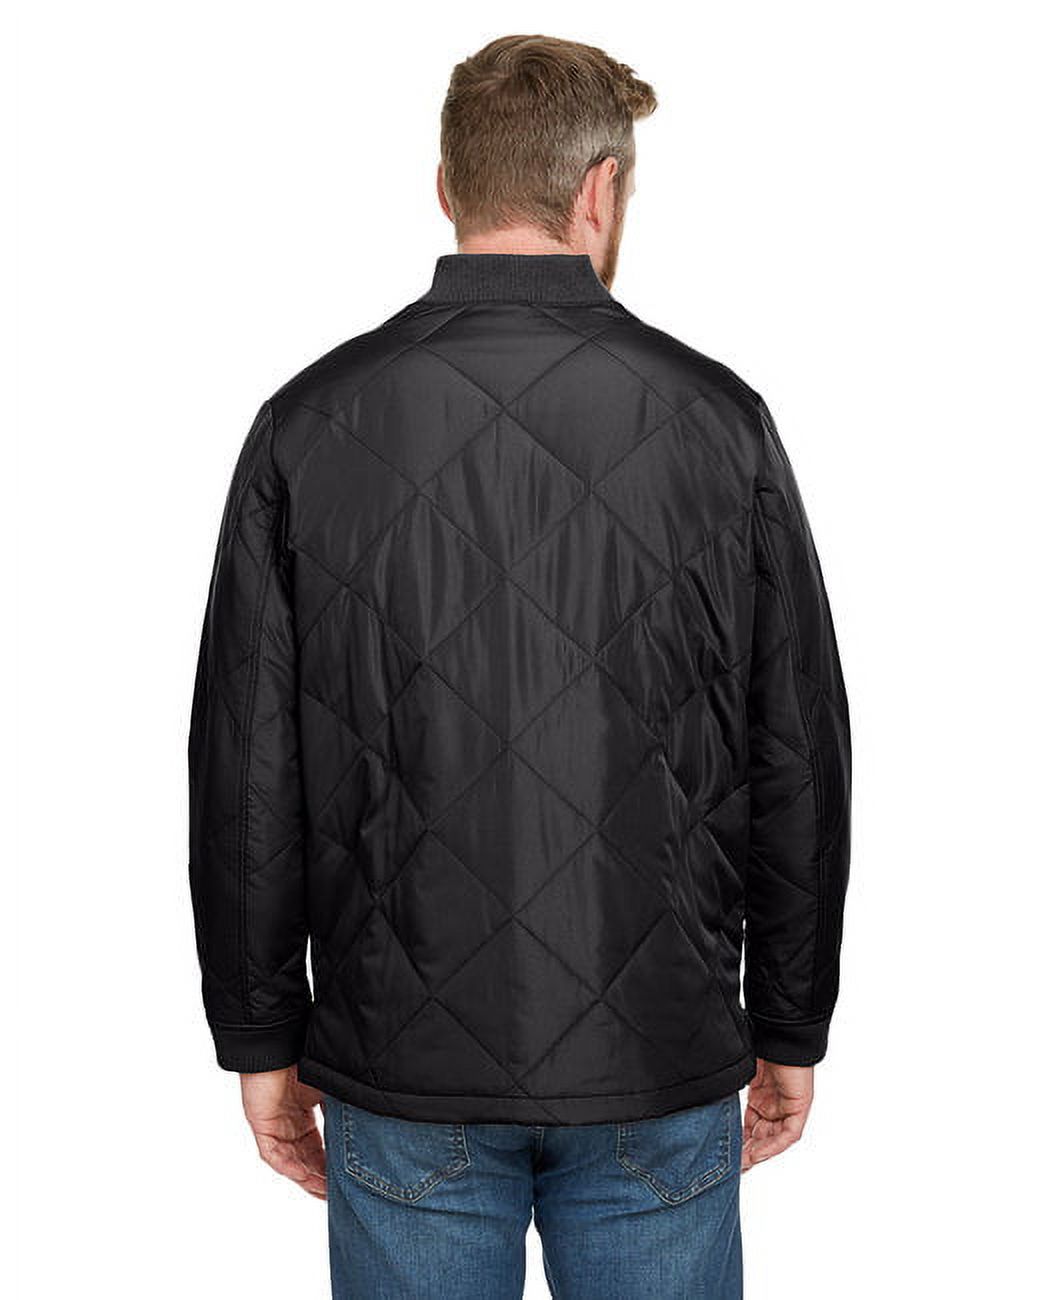 Adult Dockside Insulated Utility Jacket - DARK CHARCOAL - 4XL - image 2 of 3